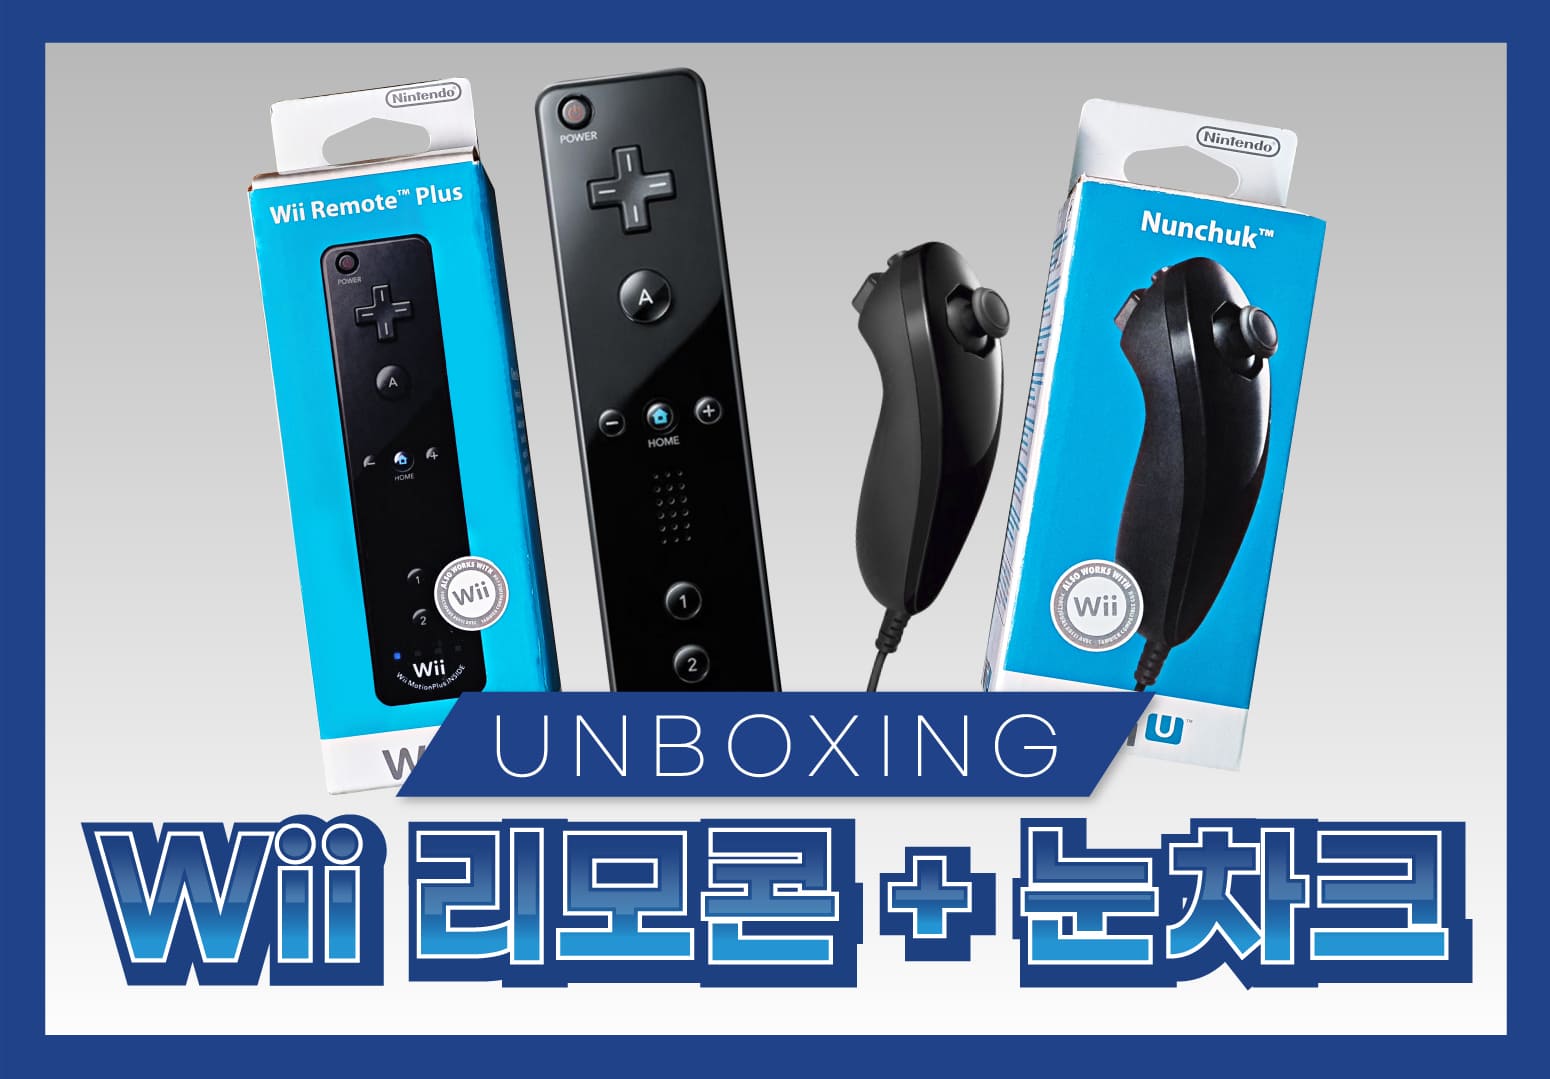 Wii 리모컨 + 눈차크 썸네일